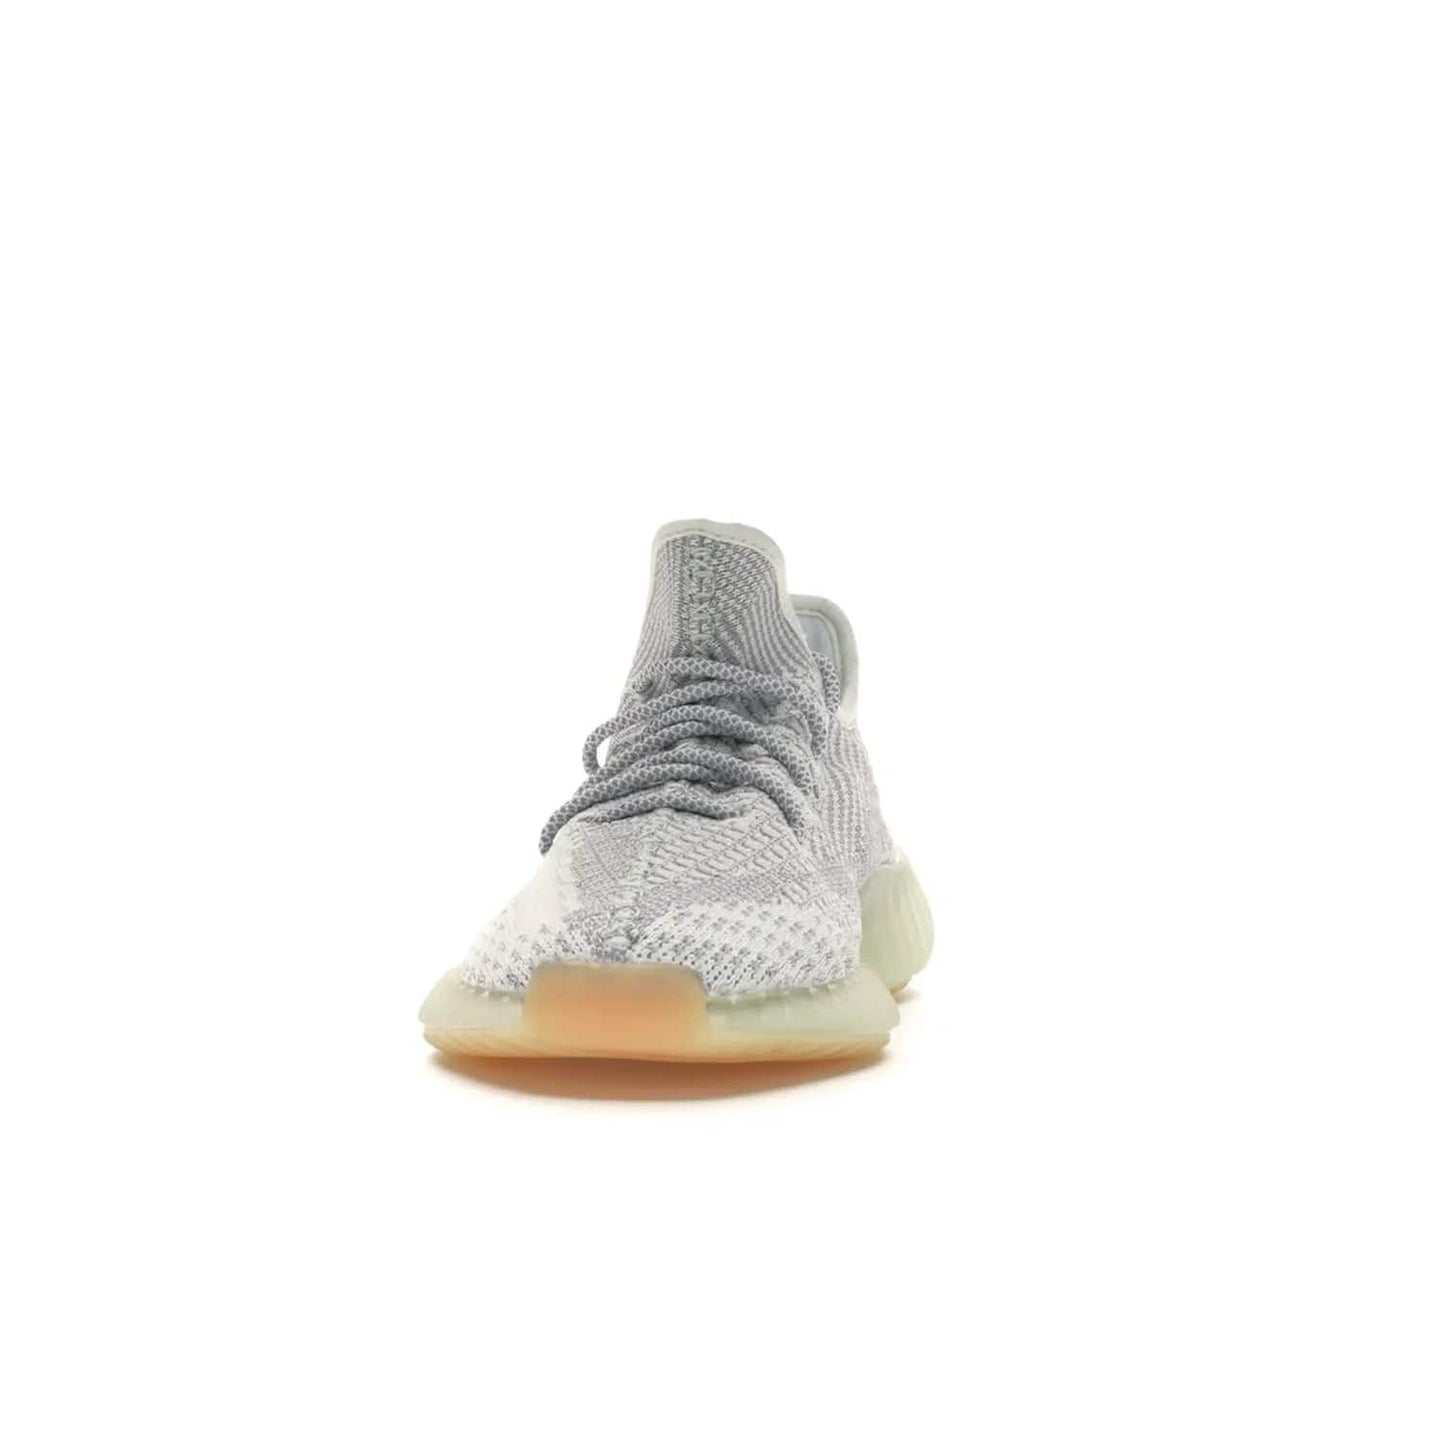 adidas Yeezy Boost 350 V2 Yeshaya (Non-Reflective) - Image 11 - Only at www.BallersClubKickz.com - Step out in style with the adidas Yeezy Boost 350 V2 Yeshaya (Non-Reflective). Gray-and-white Primeknit upper with mesh side stripe & rope laces, plus a translucent Boost sole with a hint of yellow. Make a statement and feel comfortable with this stylish sneaker.